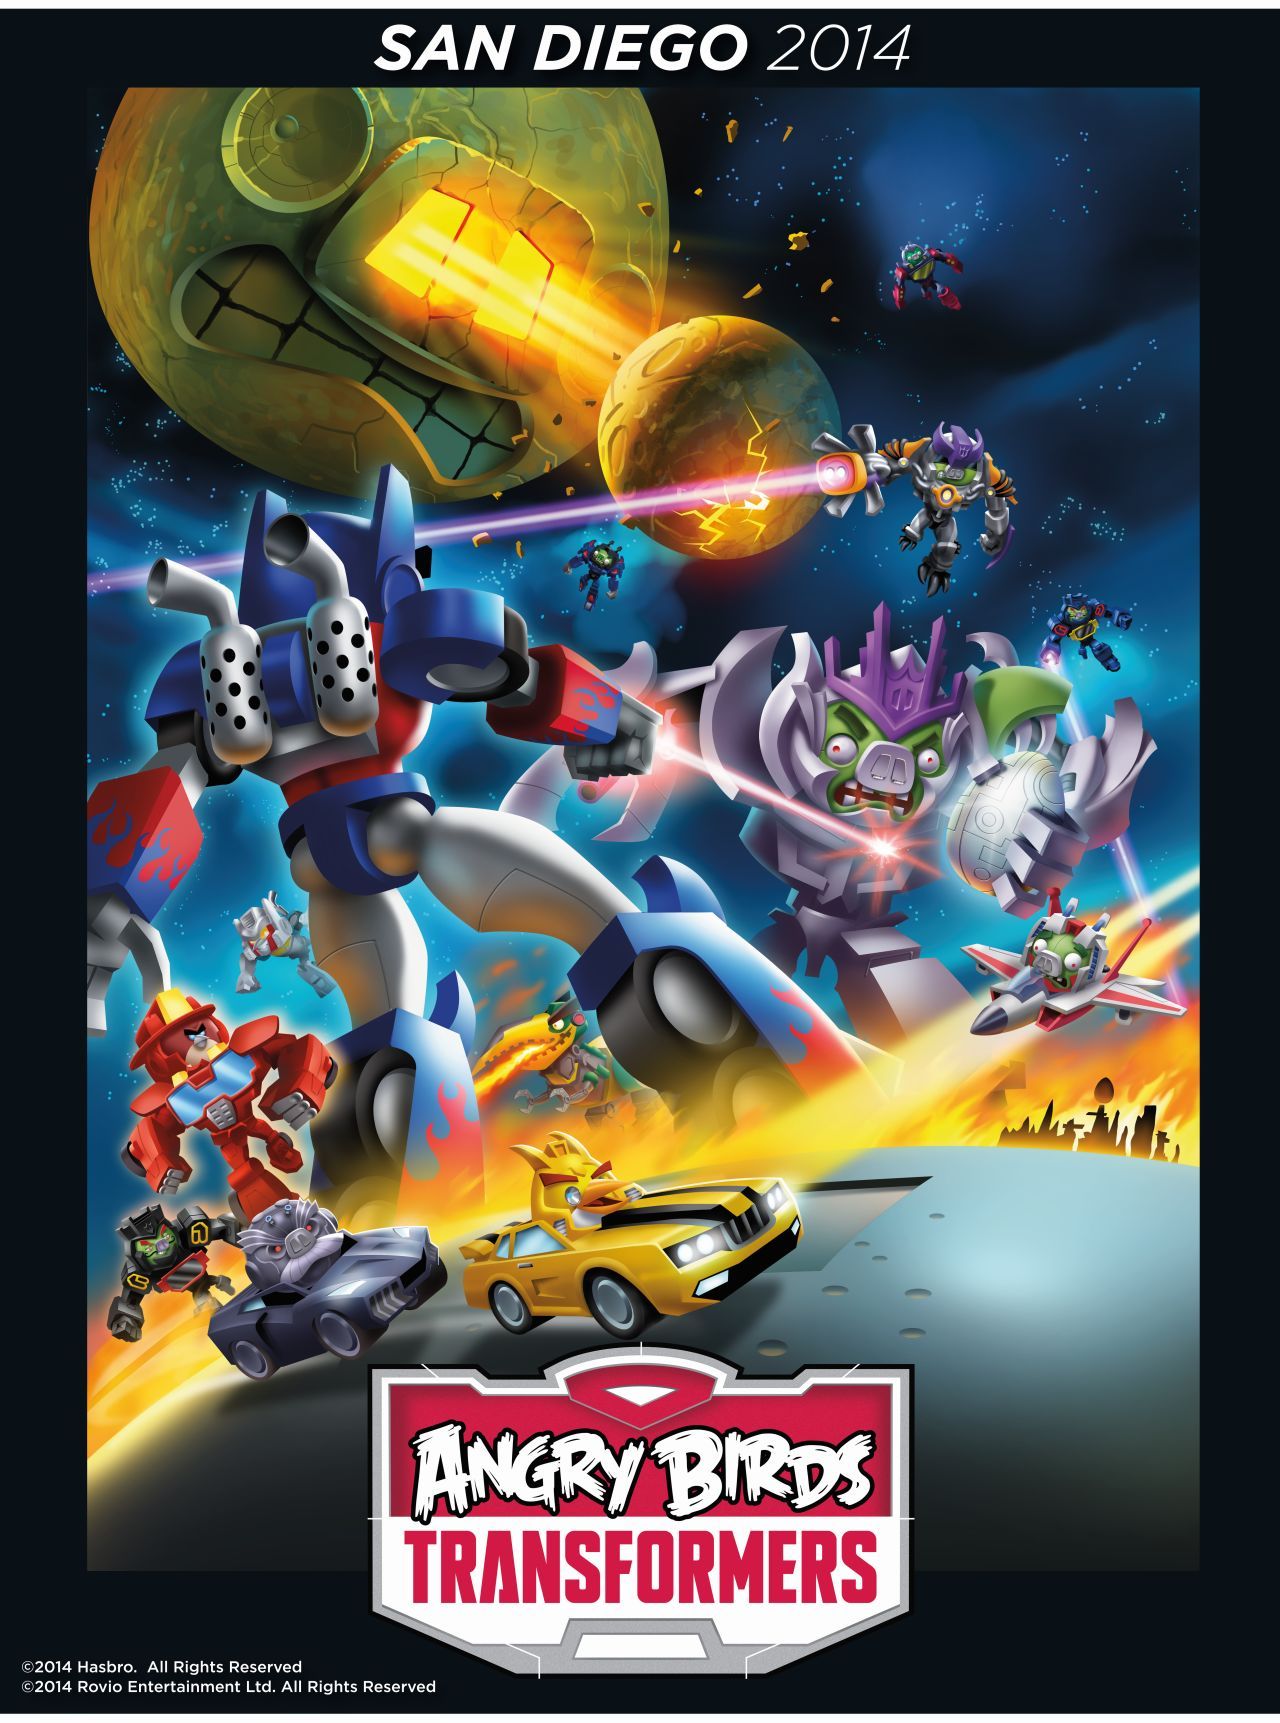 Angry Birds Transformers poster with silver knight Optimus Prime. Angry birds, Angry birds characters, Angry birds movie